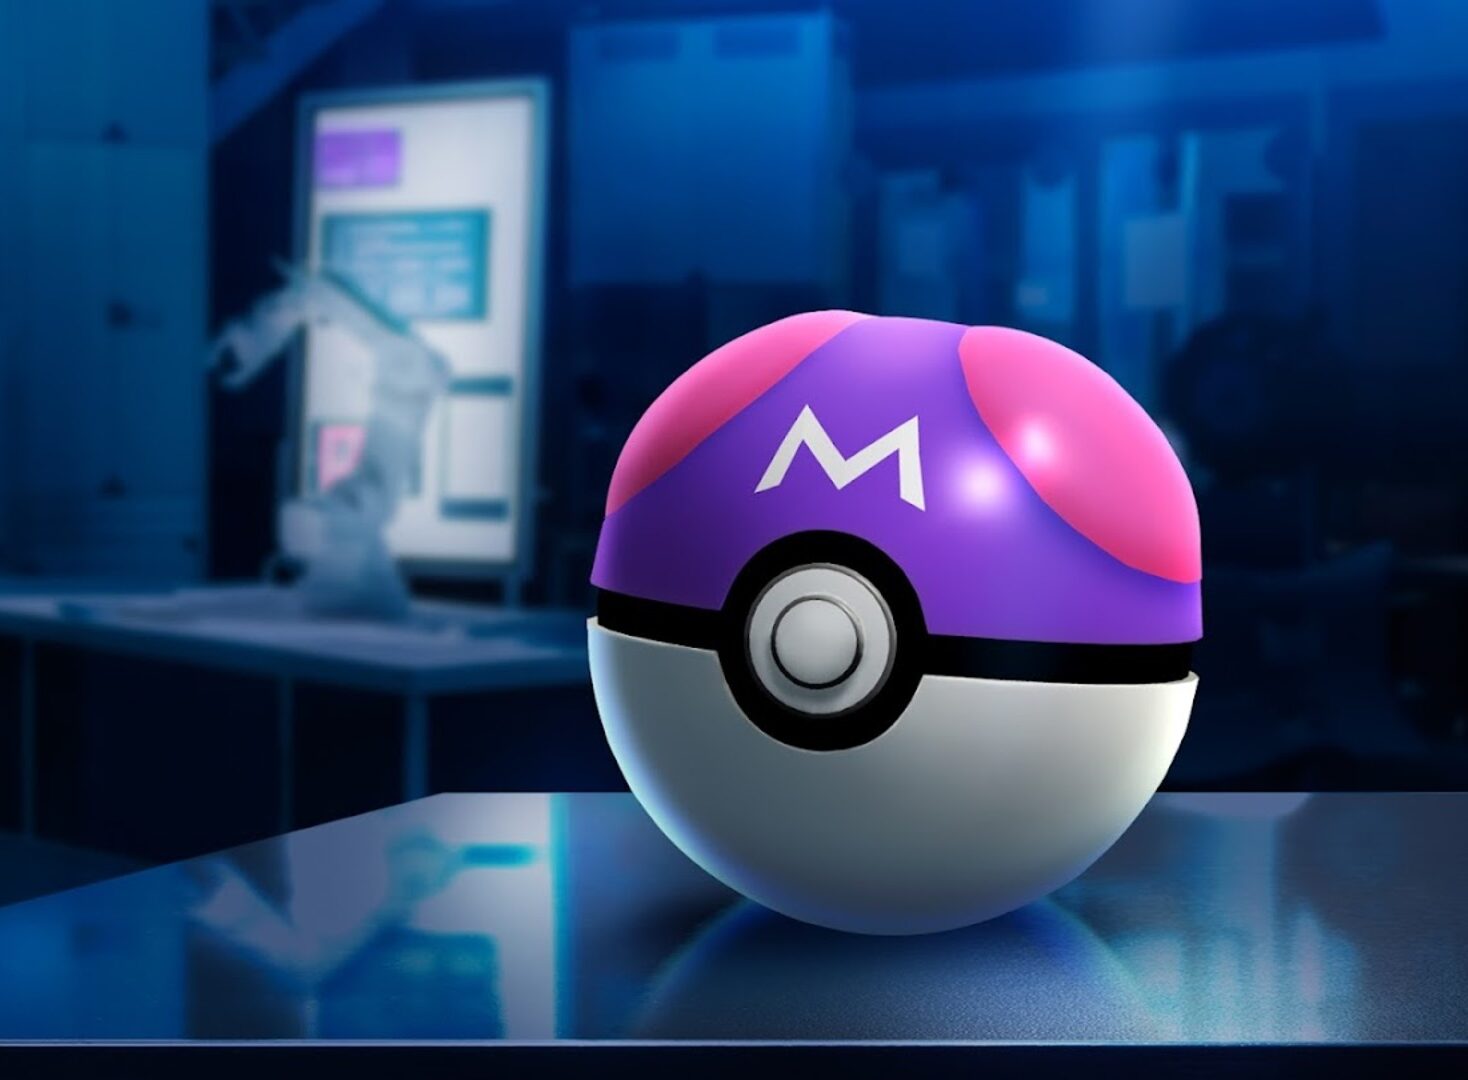 Don't miss your chance to get a Master Ball in Pokemon GO.